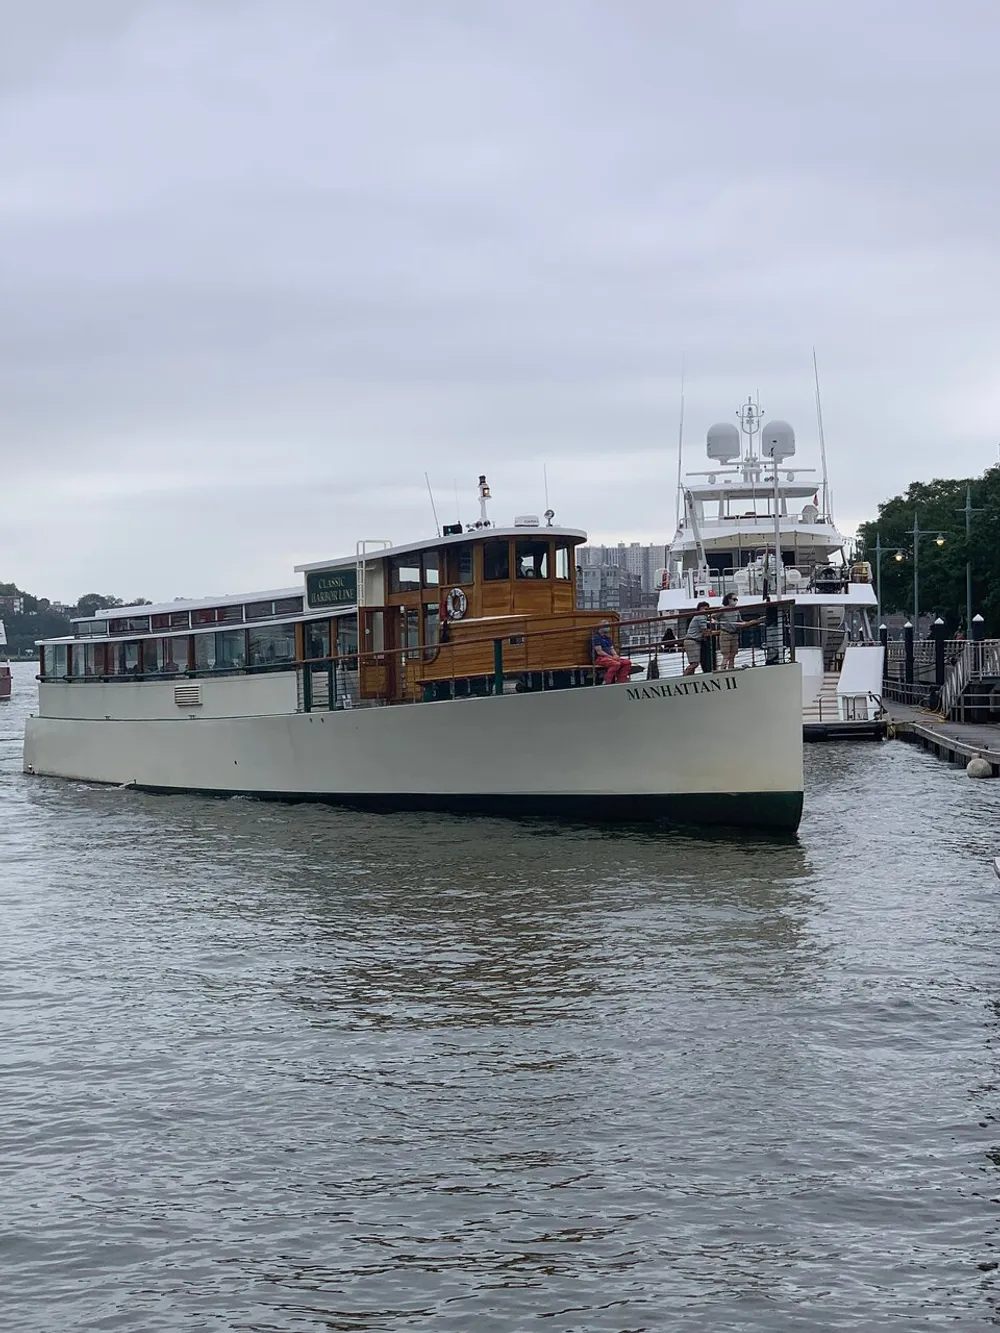 The image features a boat named Manhattan II docked at a harbor on an overcast day